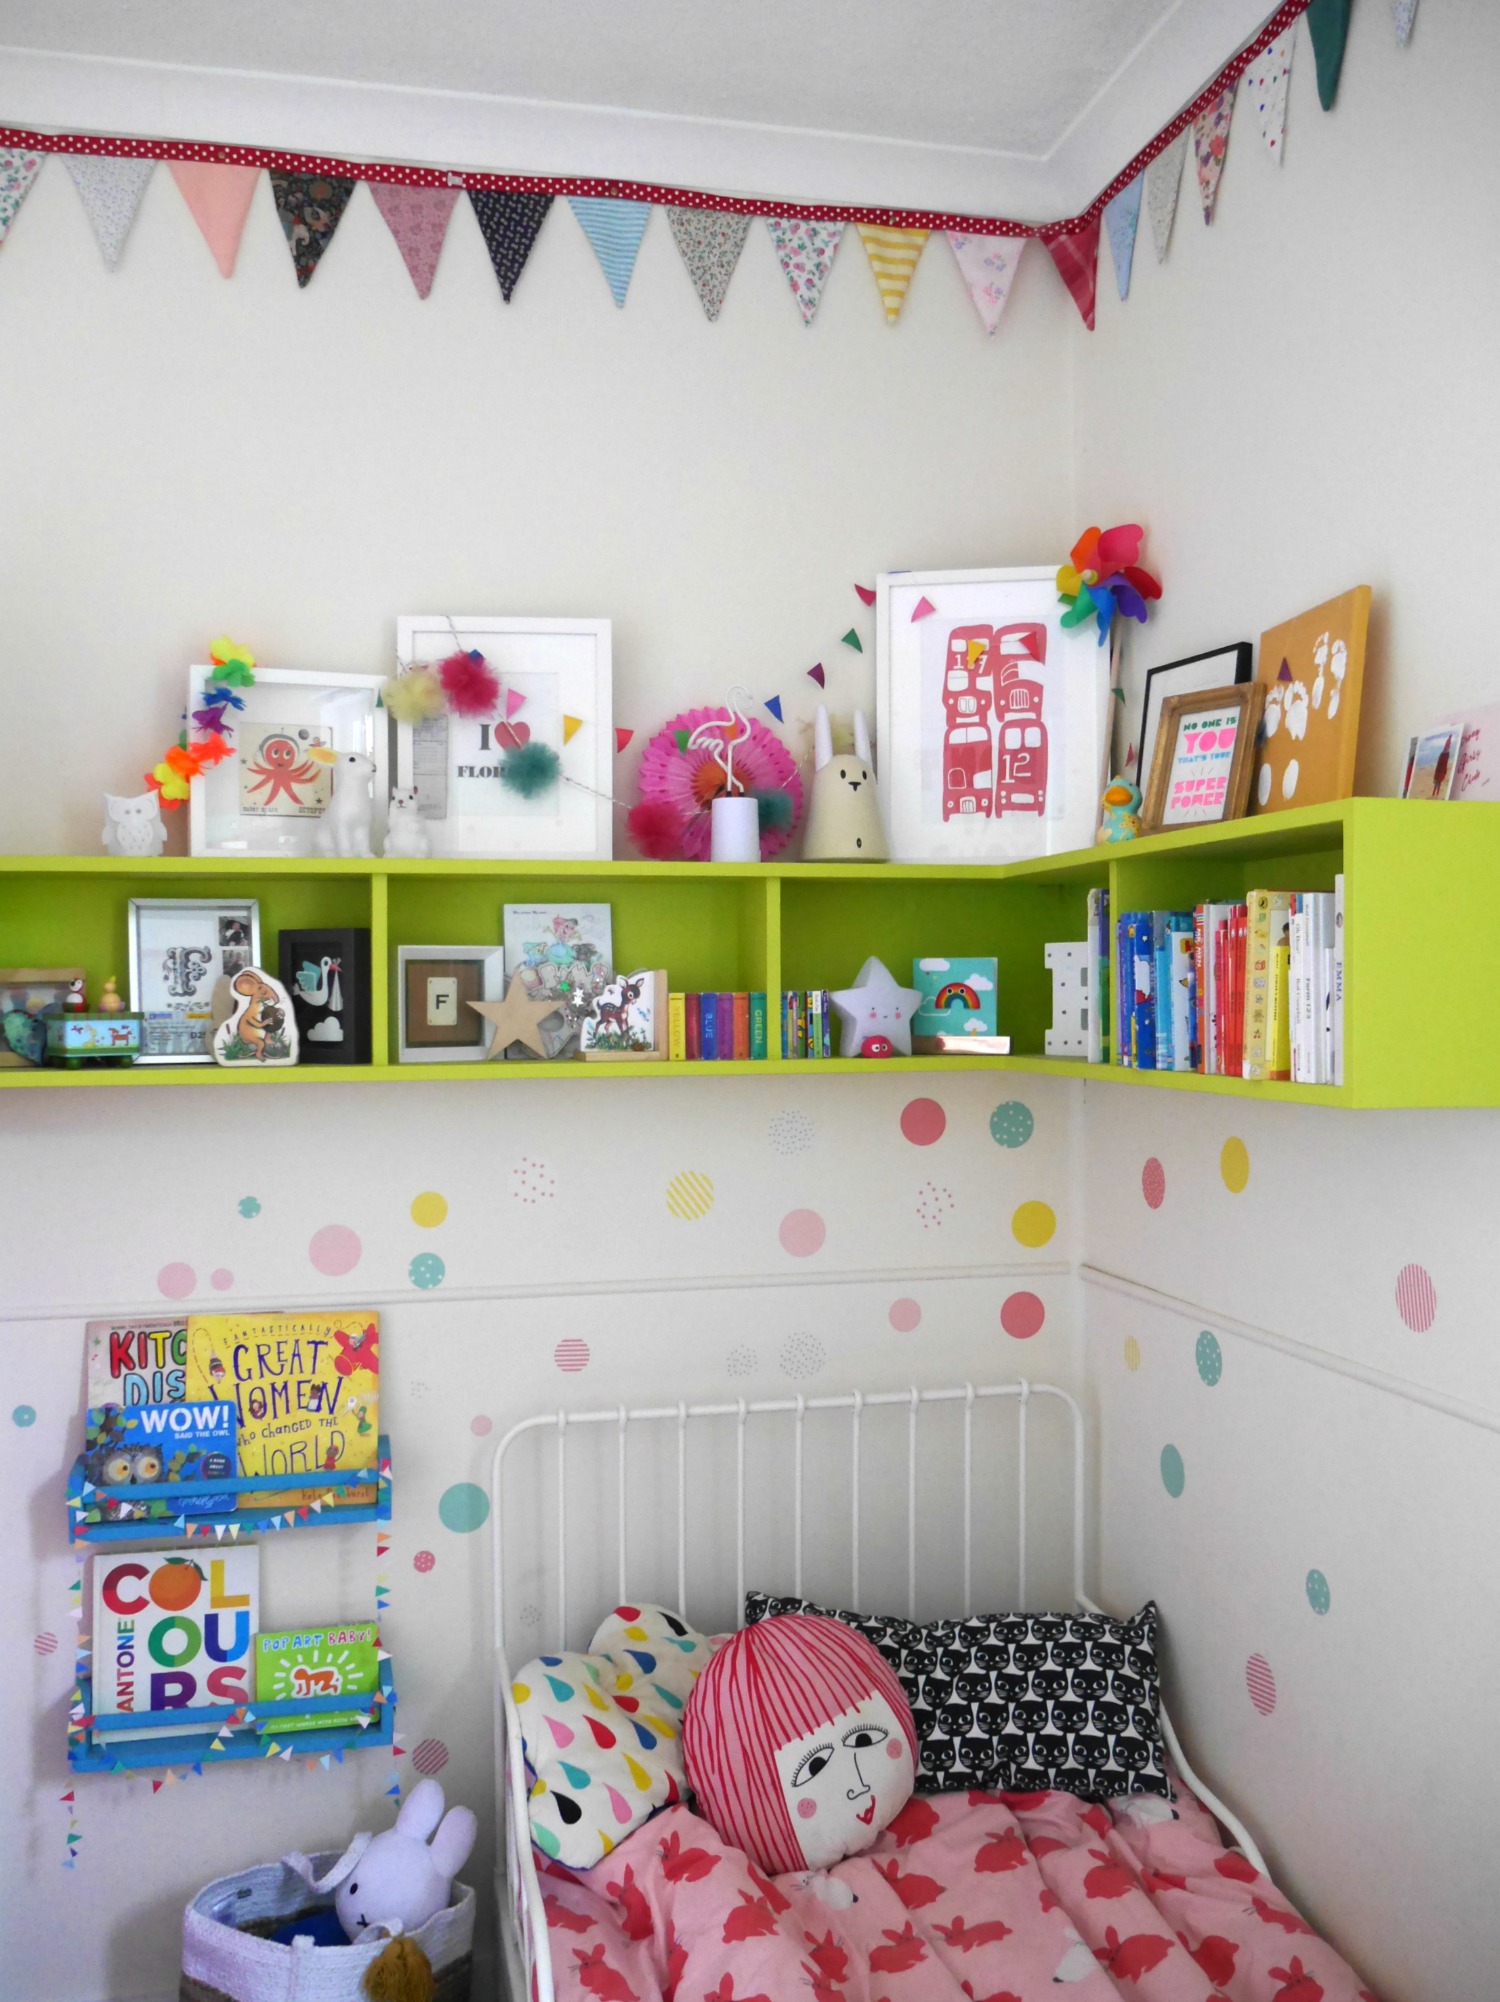 Colourful children's bedrooms with painted shelves and wall stickers